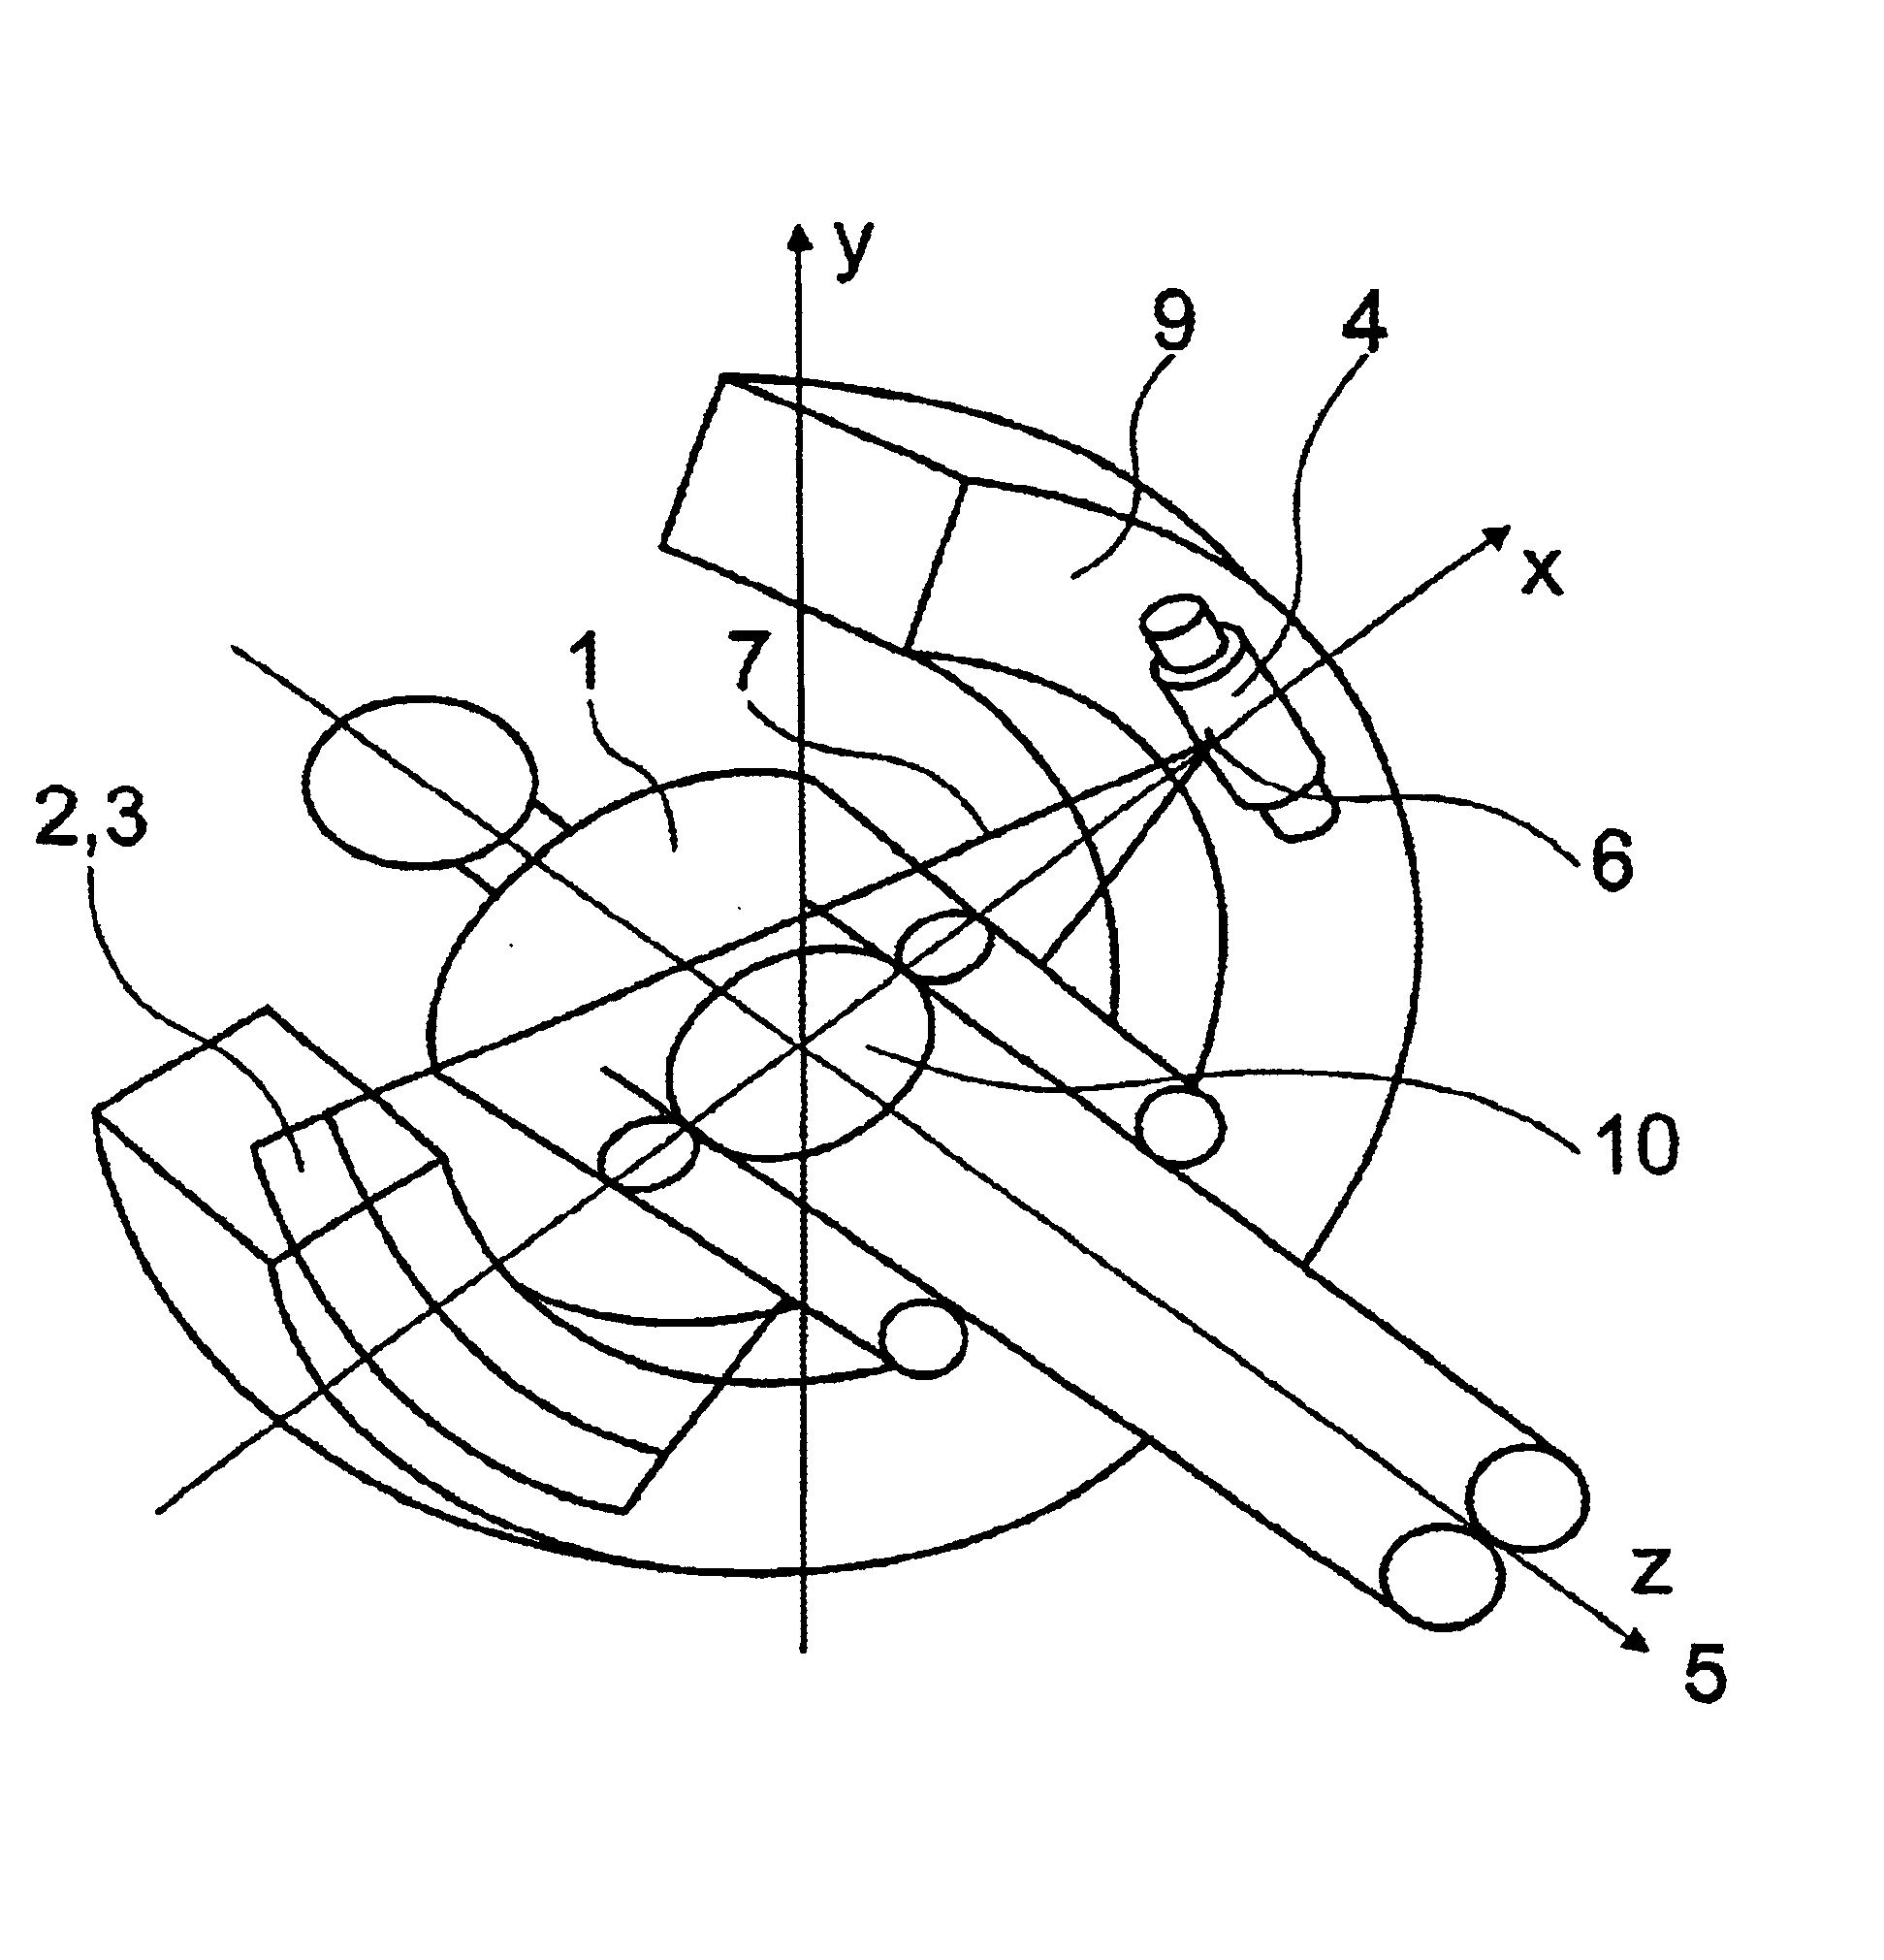 Method for measuring the dose distribution in a computed tomography apparatus